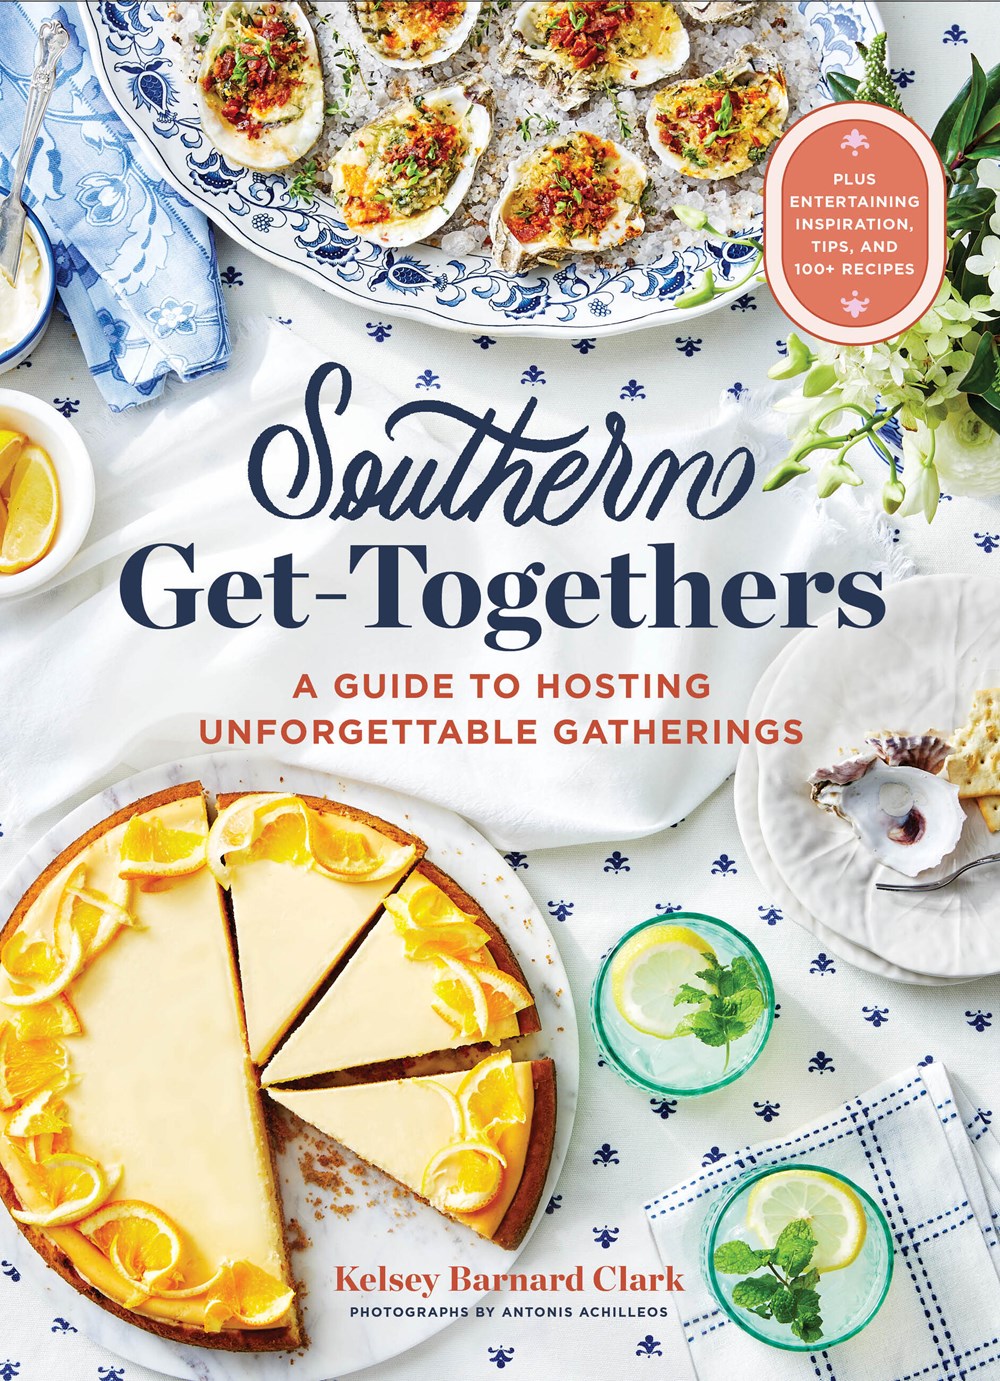 Southern Get-Togethers: A Guide to Hosting Unforgettable Gatherings